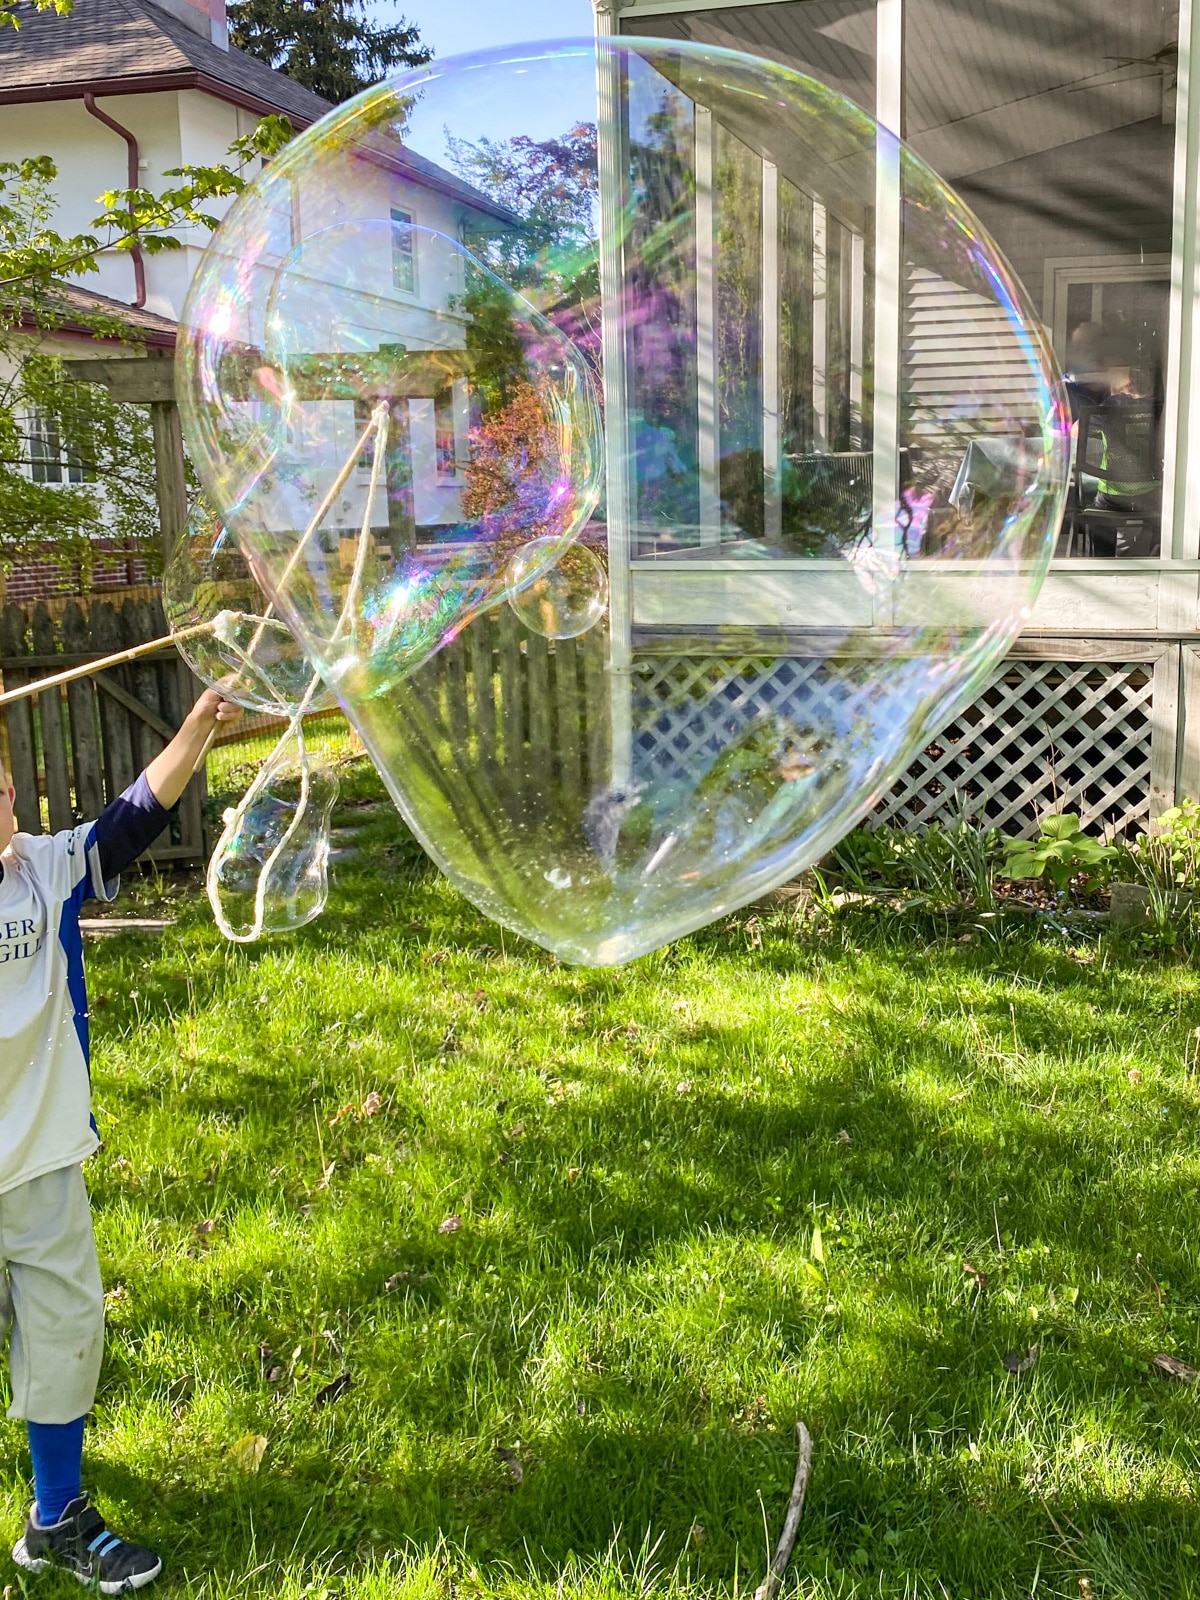 giant soap bubbles floating through air.